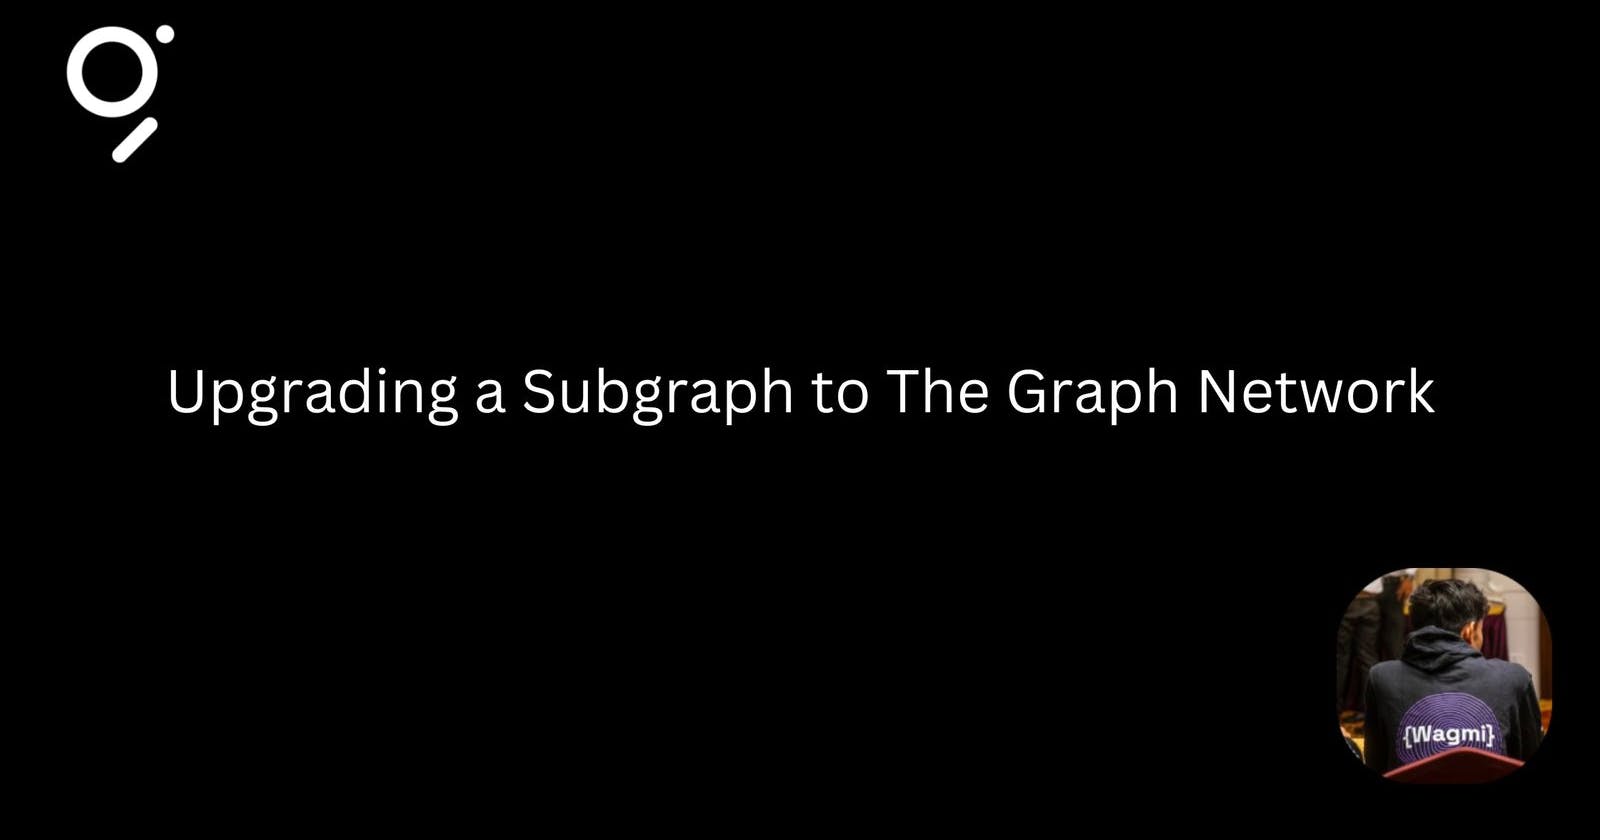 Upgrading a Subgraph to The Graph Network